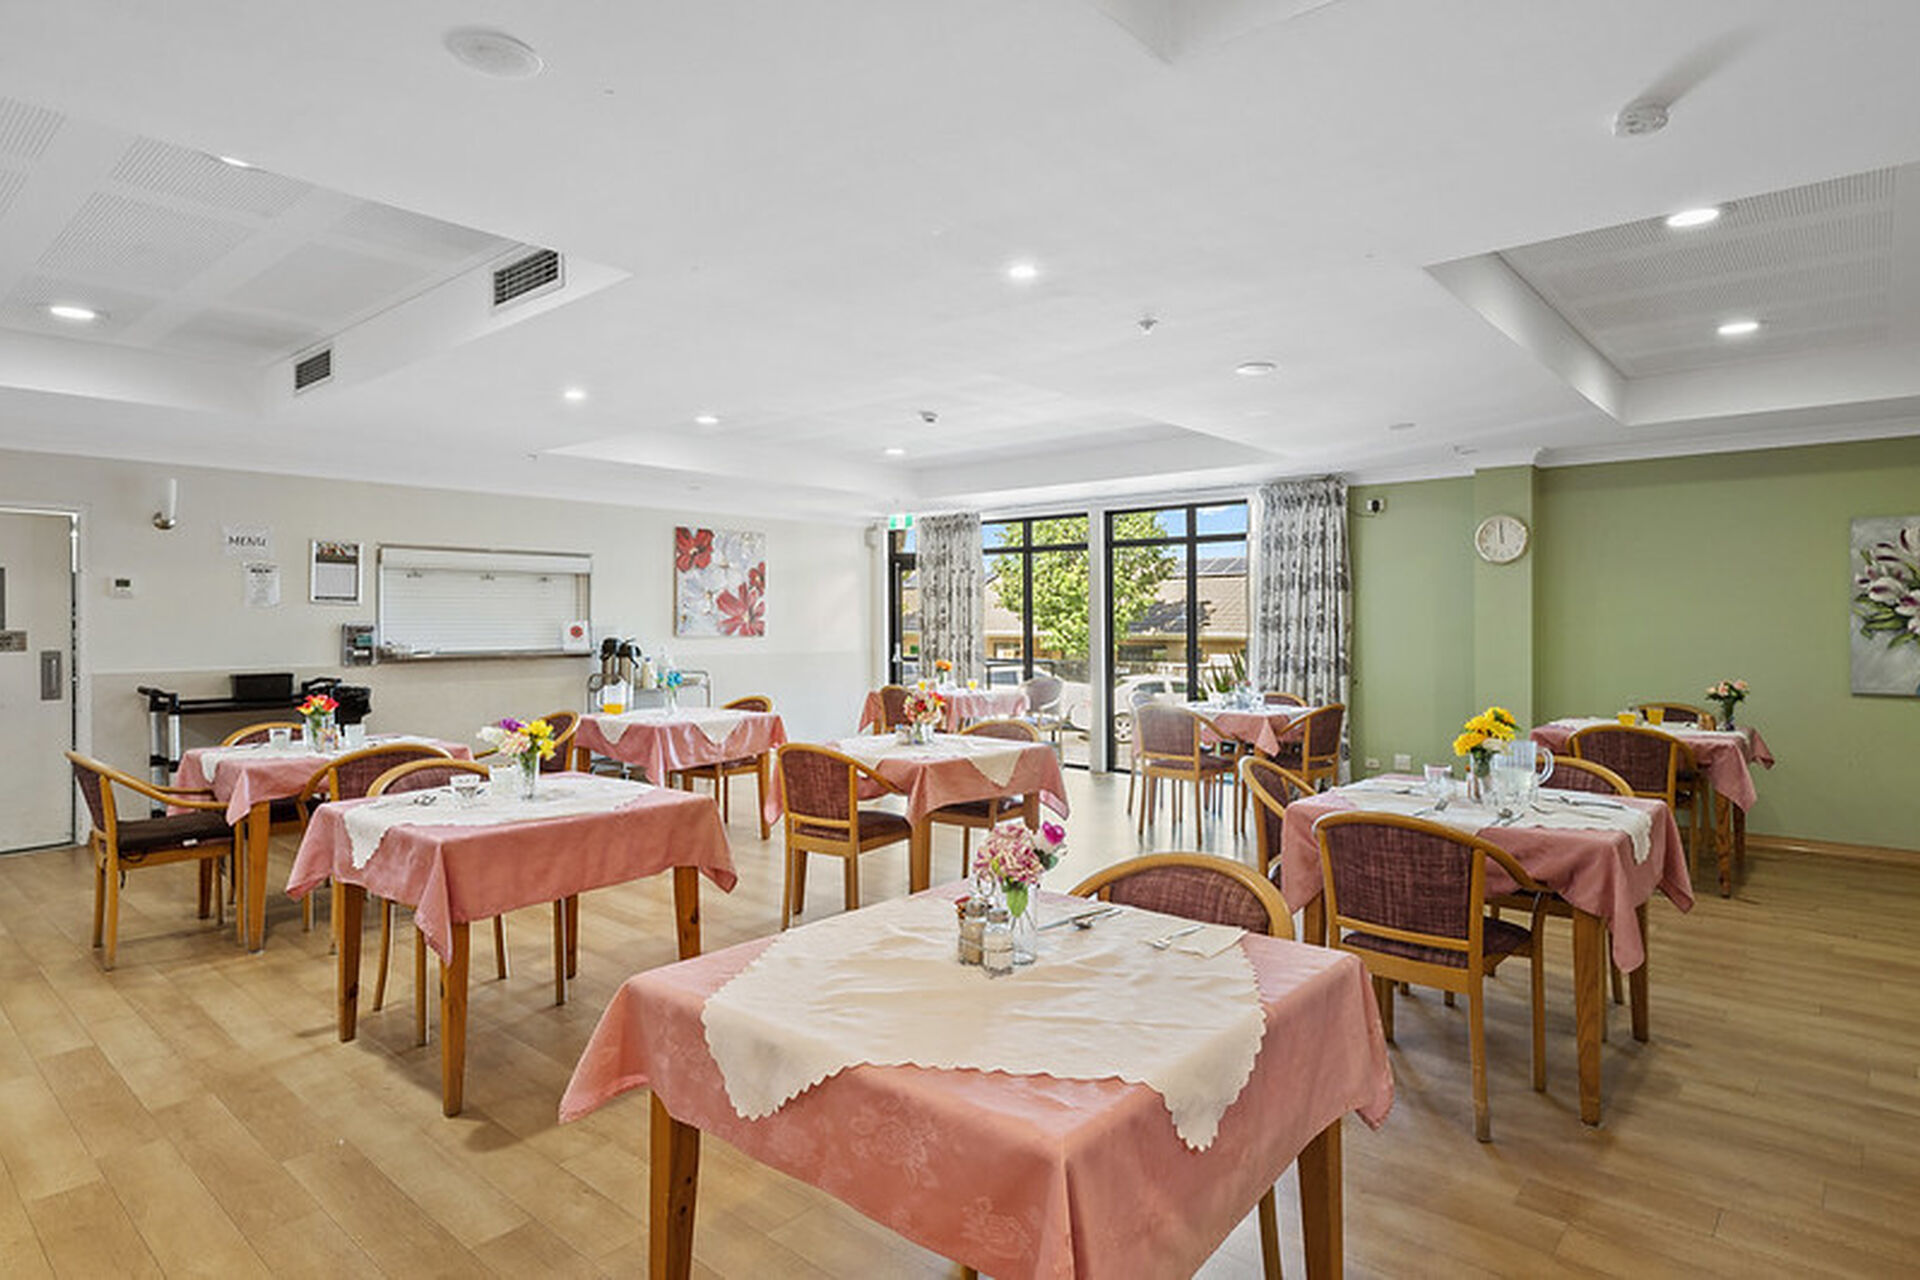 dining room for nursing home residents to enjoy a meal at baptistcare blue hills manor residential aged care home in prestons nsw